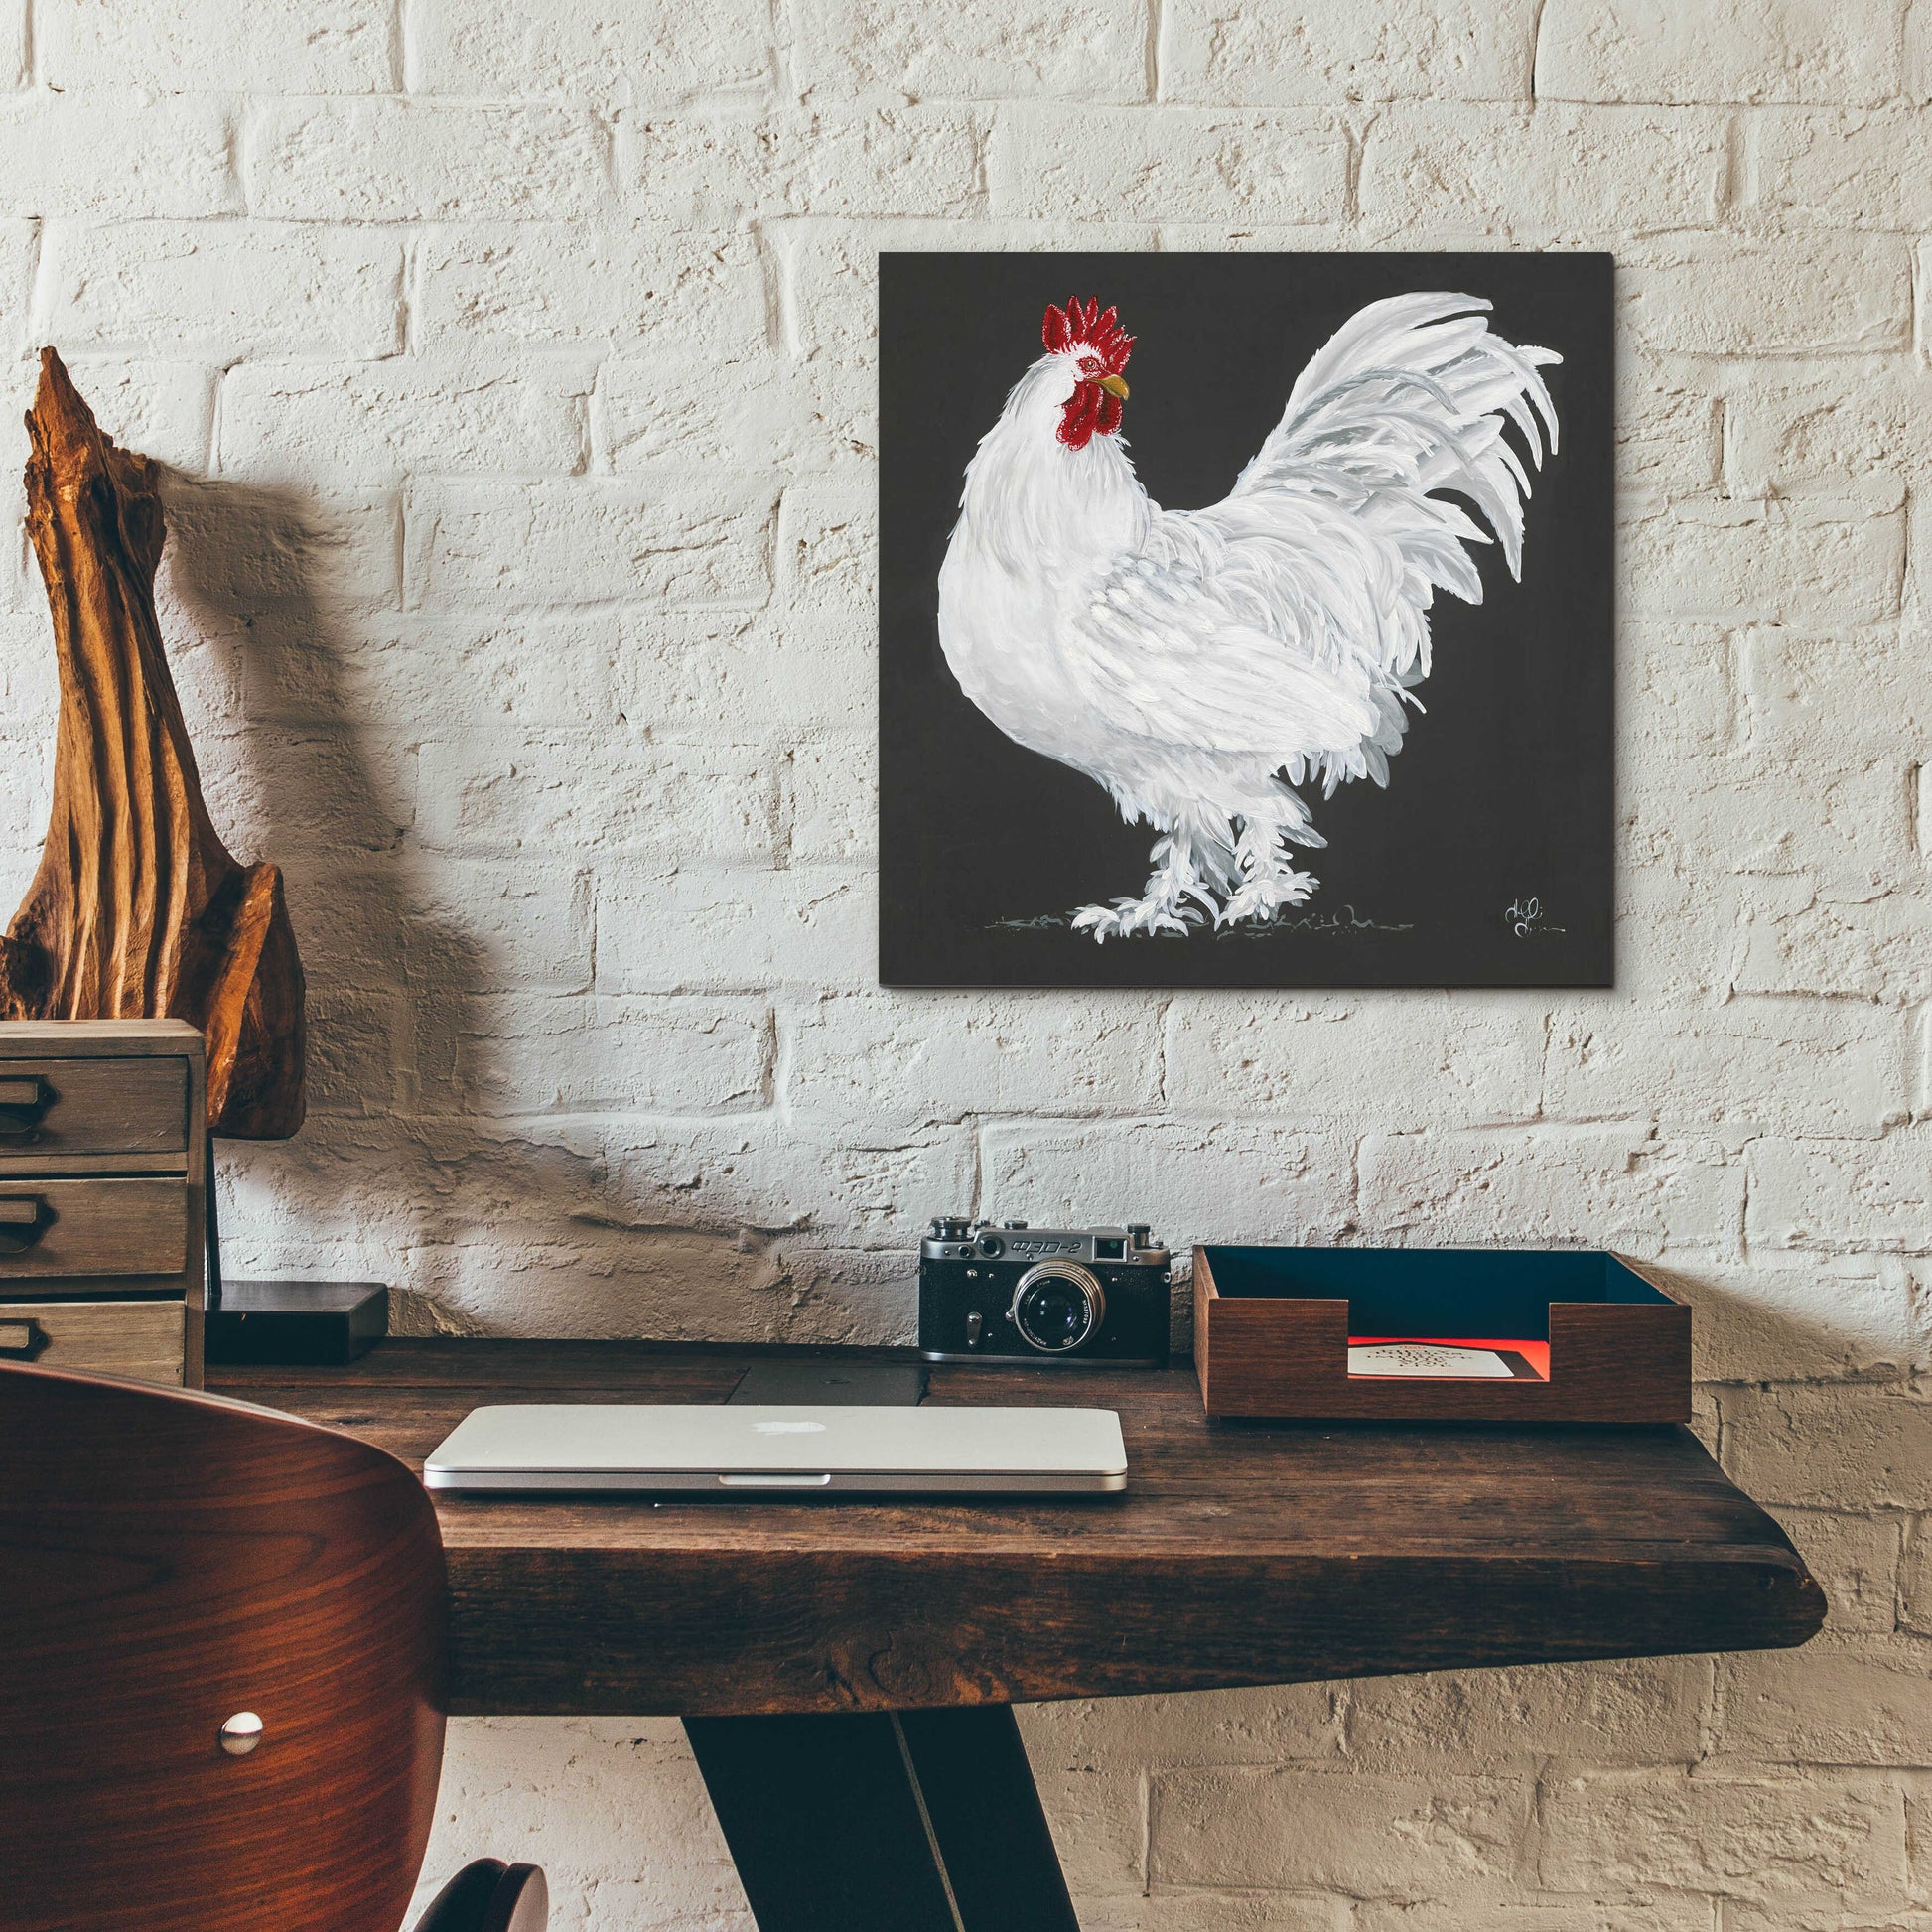 Epic Art 'Rooster' by Hollihocks Art, Acrylic Glass Wall Art,12x12